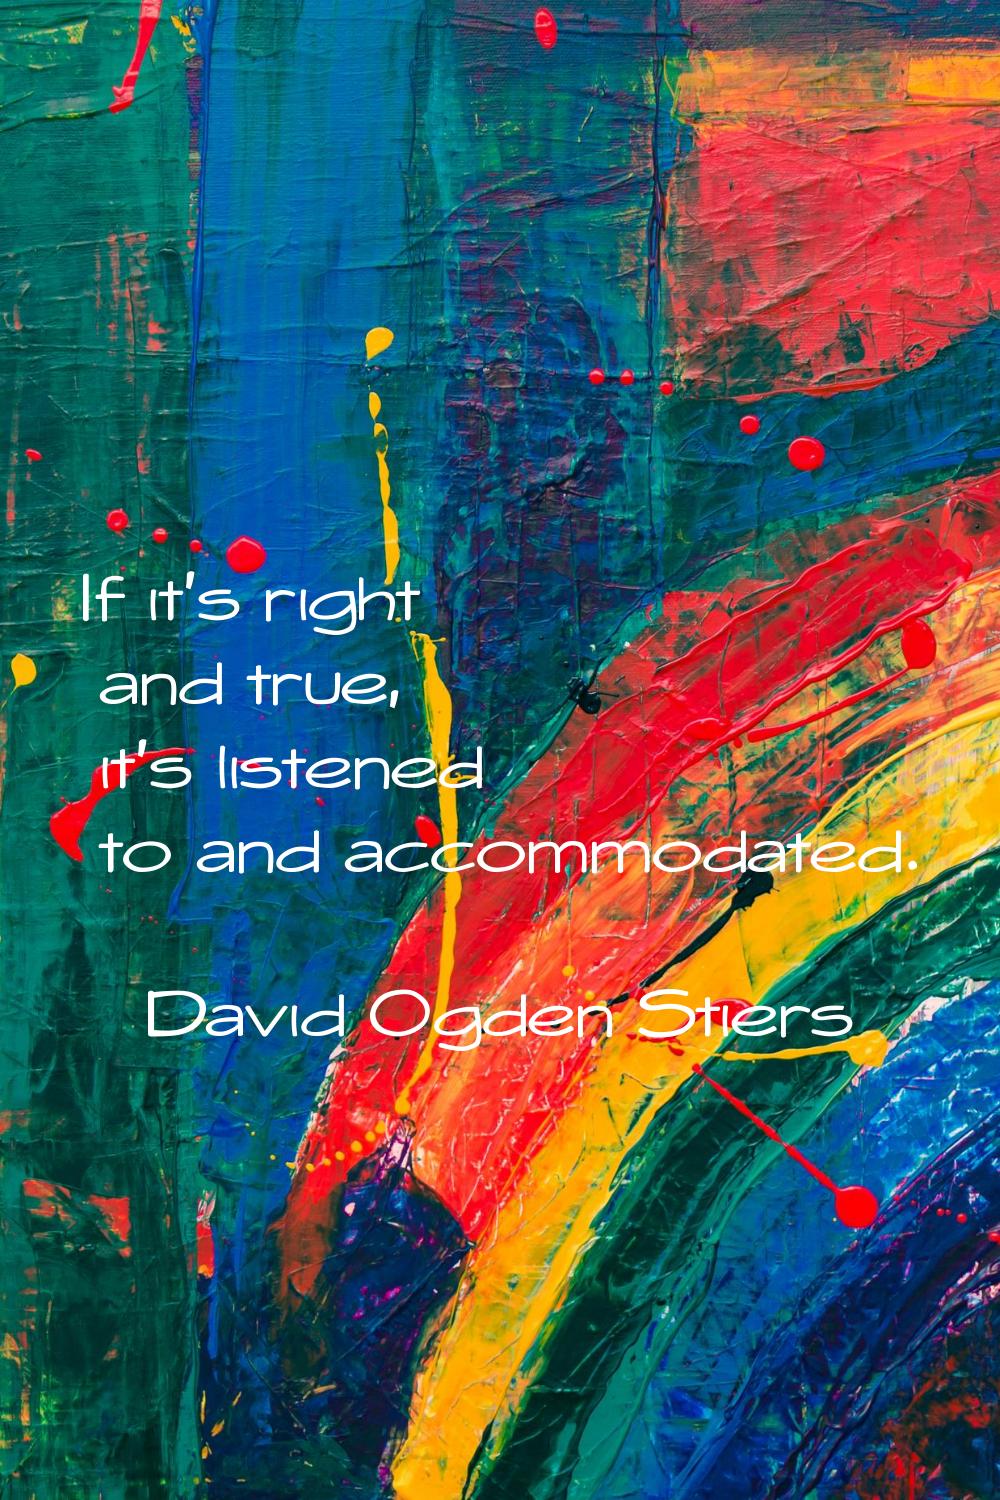 If it's right and true, it's listened to and accommodated.